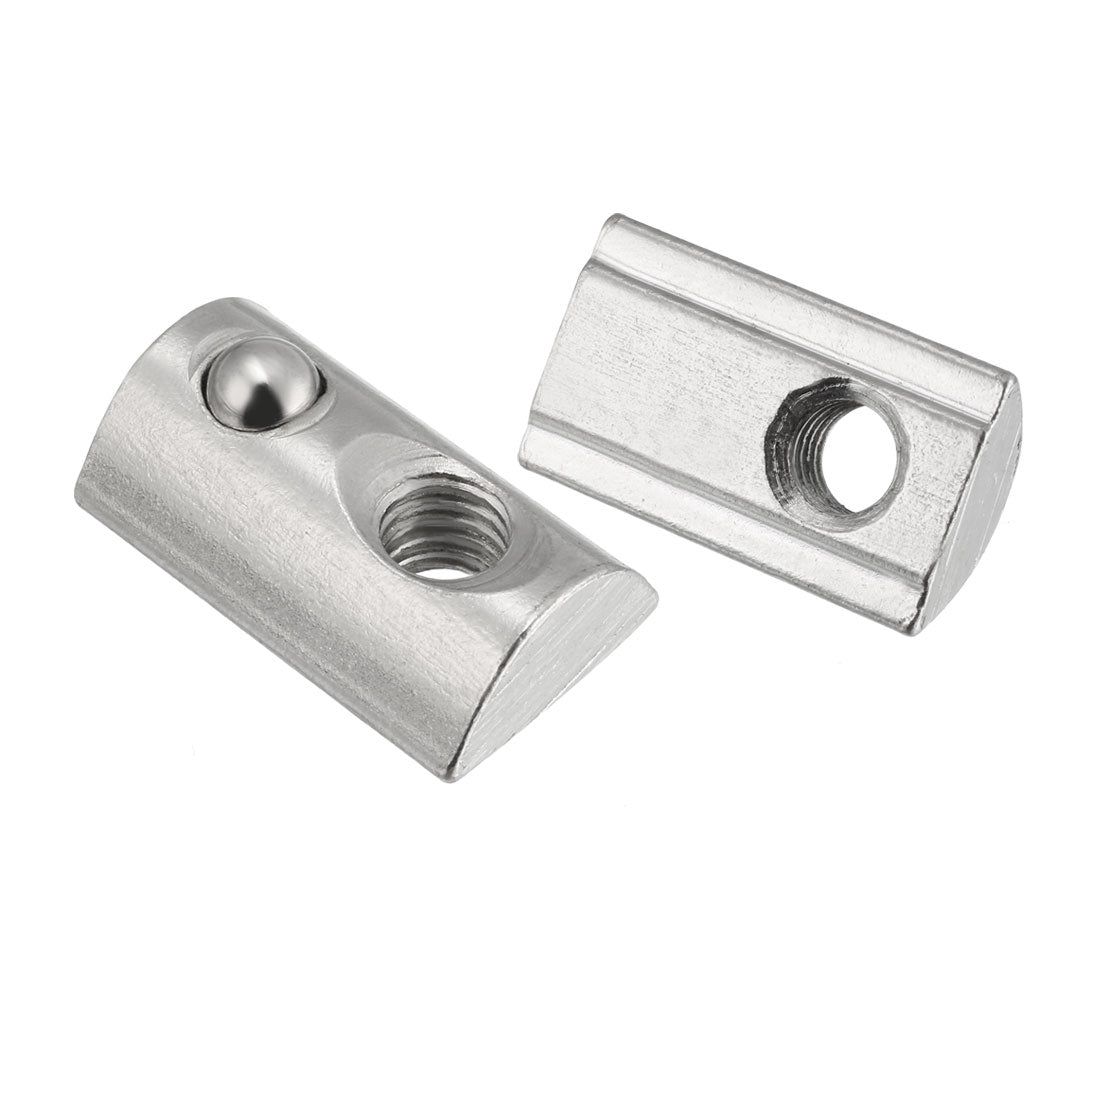 uxcell Uxcell Roll-In Spring M6 T Nut 4040 Series Aluminum Extrusion, for 8mm T Slot 12 Pcs